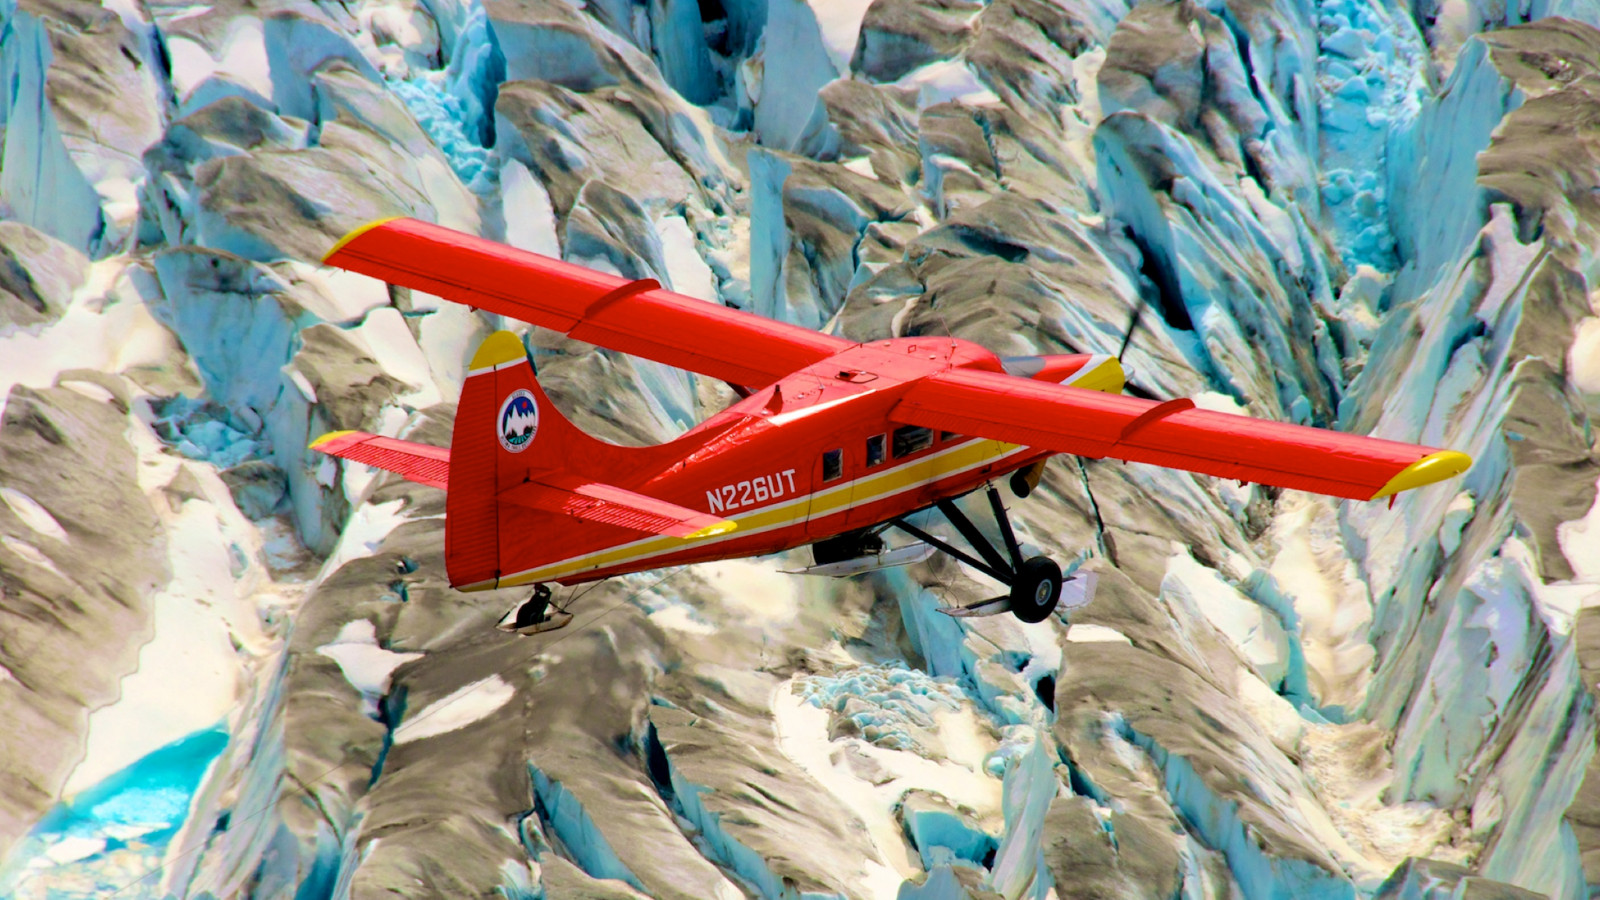 Image shows a NASA Airborne Campaign observing climate impacts in the arctic. This red plane is a DHC-3 Otter, the plane flown in NASA’s Operation IceBridge-Alaska surveys of mountain glaciers in Alaska. Over the past few decades, average global temperatures have been on the rise, and this warming is happening two to three times faster in the Arctic. Credit: Chris Larsen, University of Alaska-Fairbanks NASA Goddard